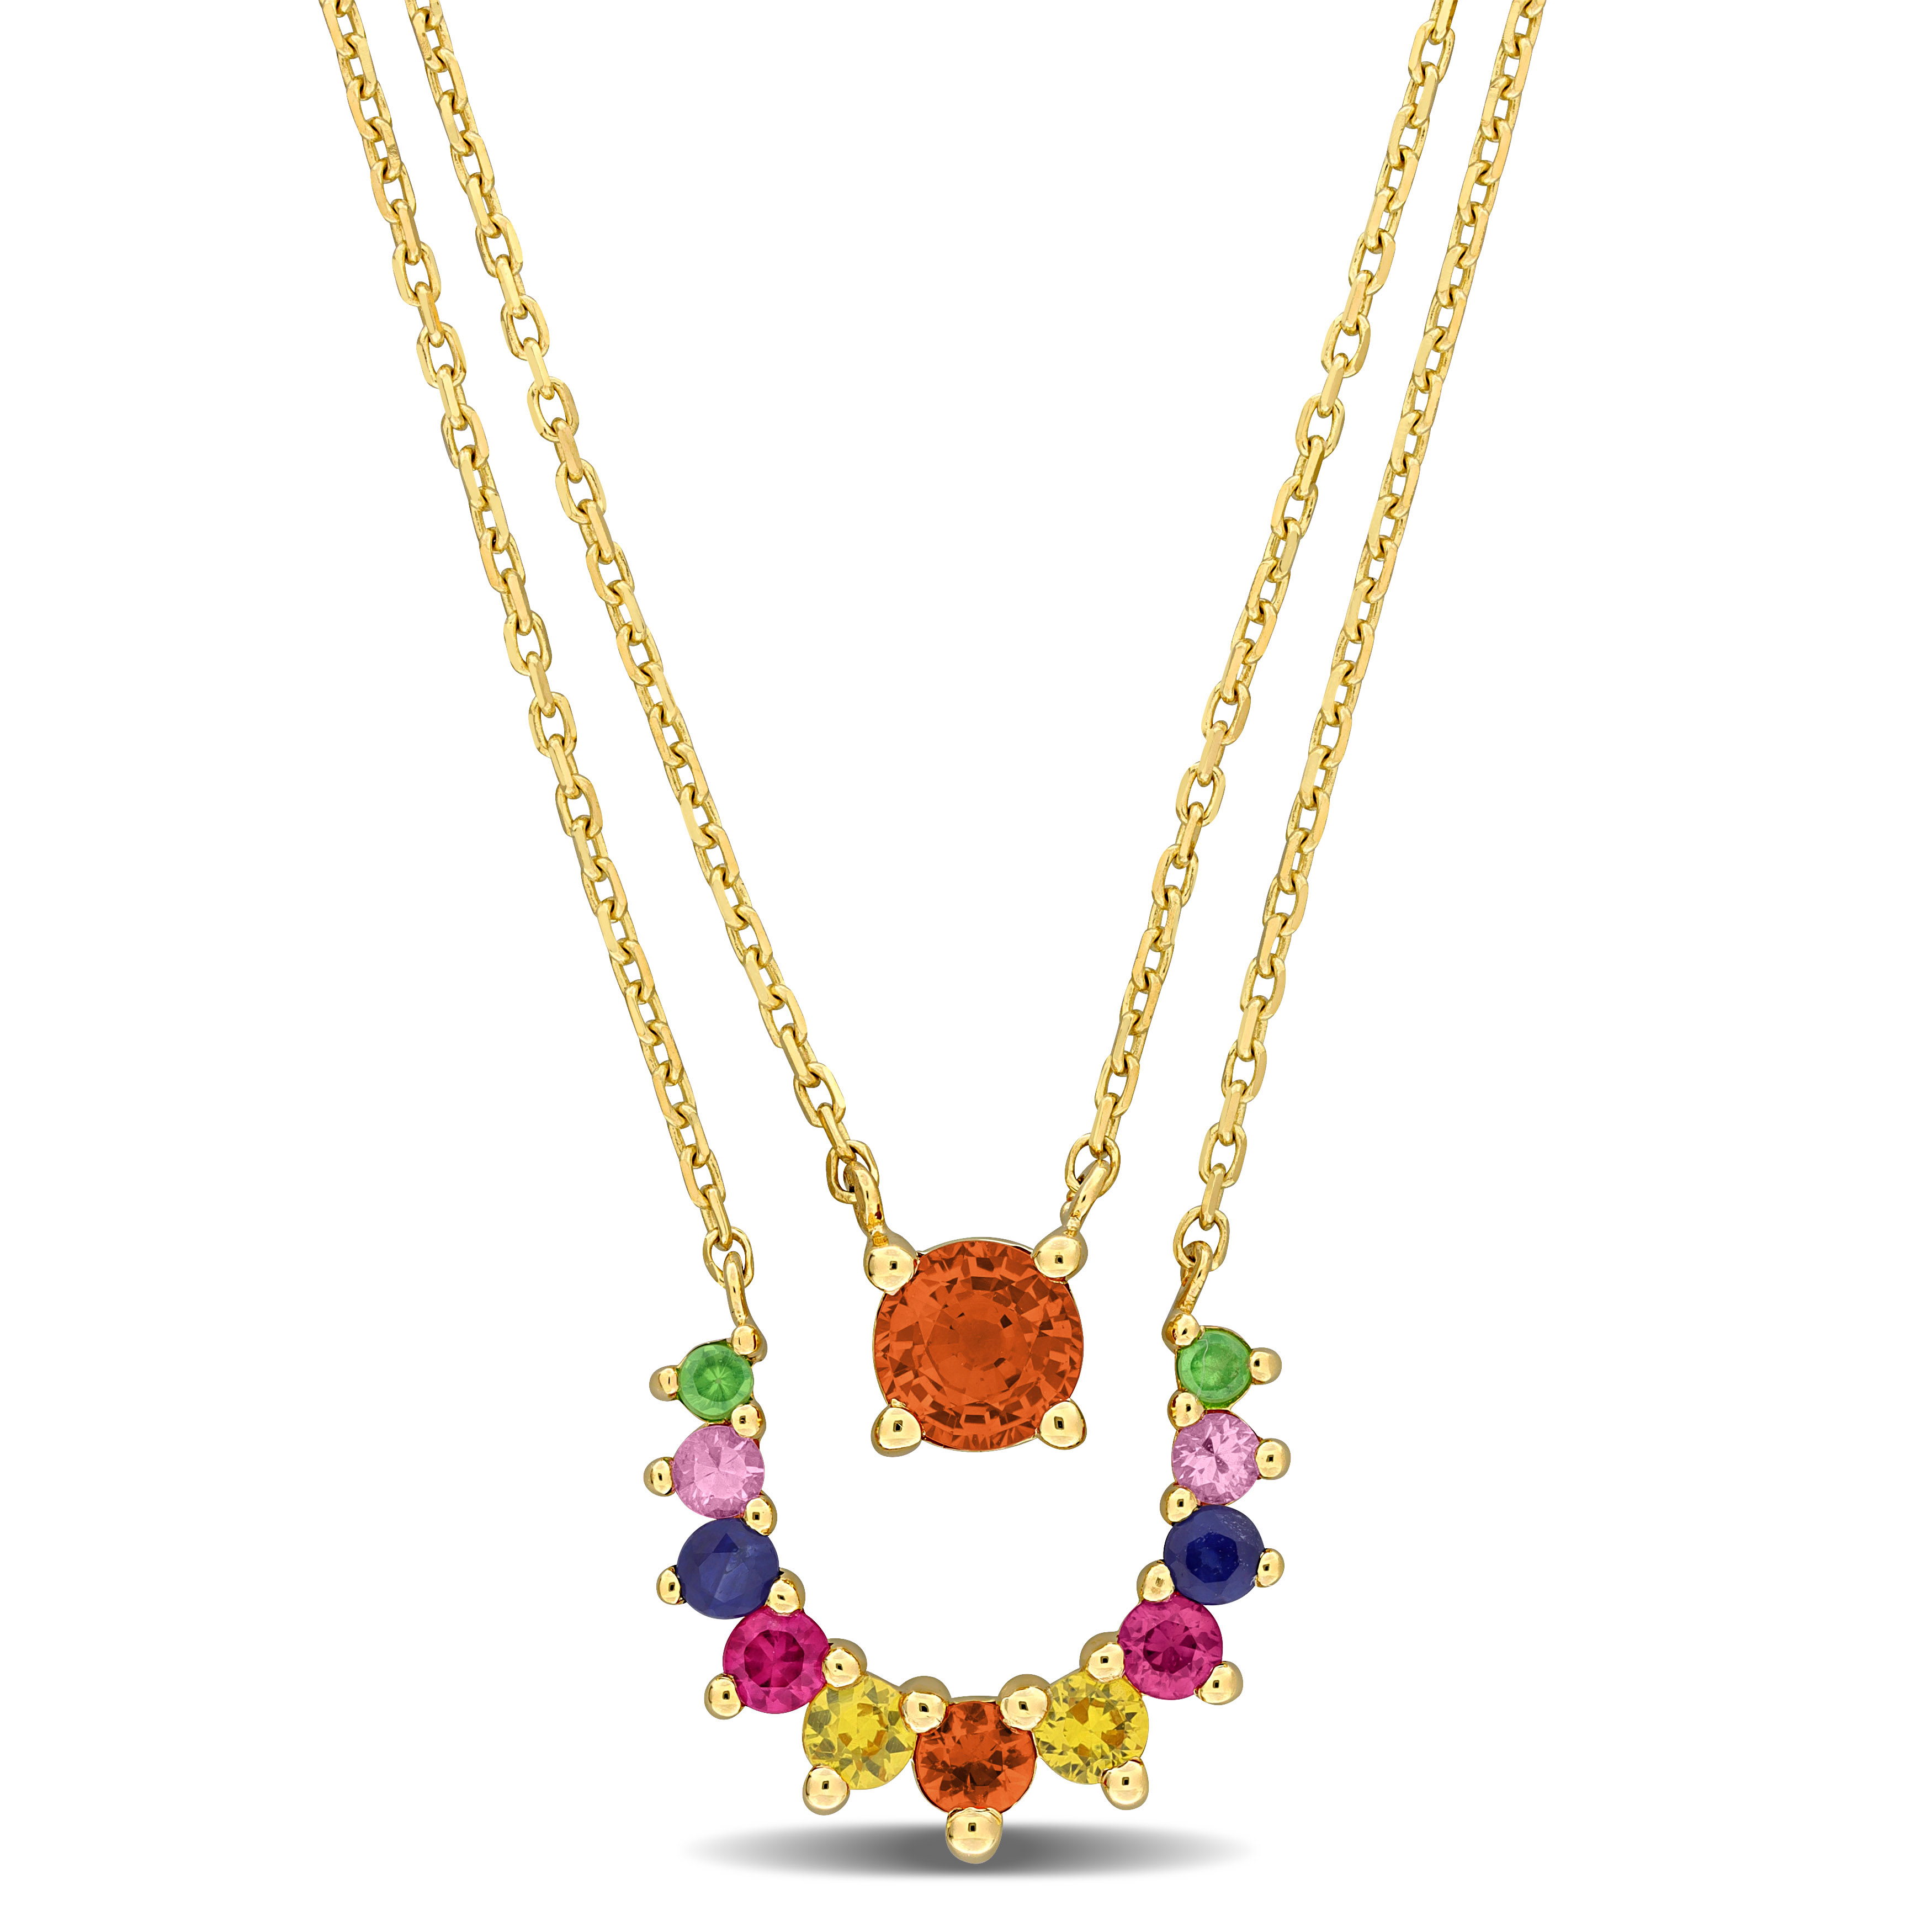 1 CT TGW Multi-Color Sapphire and Tsavorite Double Layered Necklace in 10k Yellow Gold - 17 in.